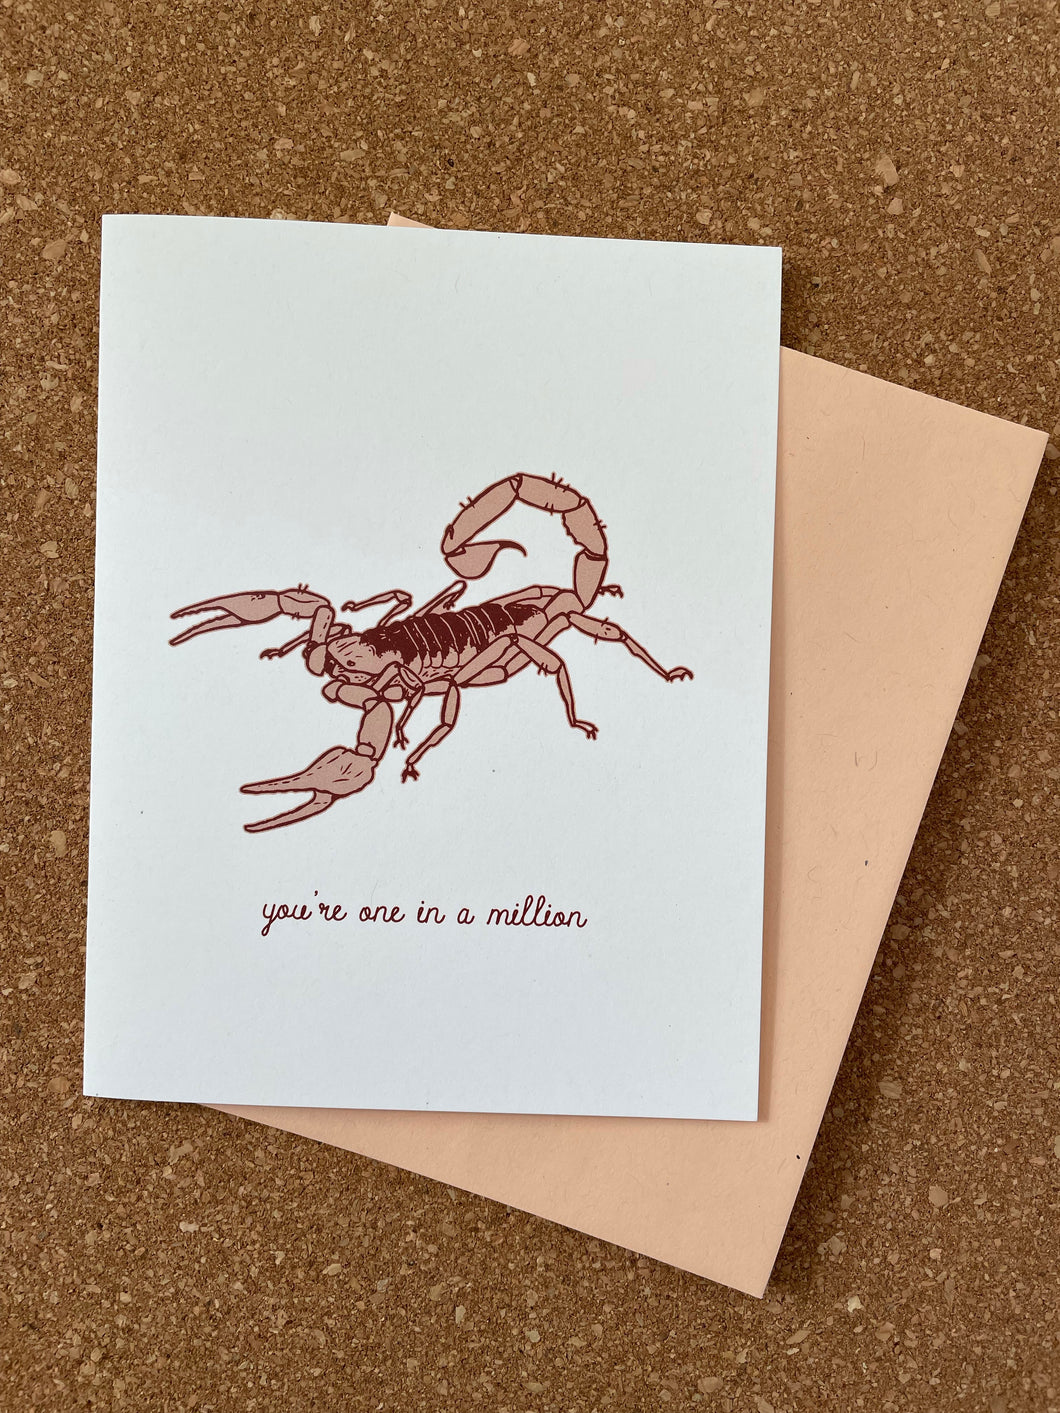 Giant Hairy Scorpion Greeting Card - you're one in a million